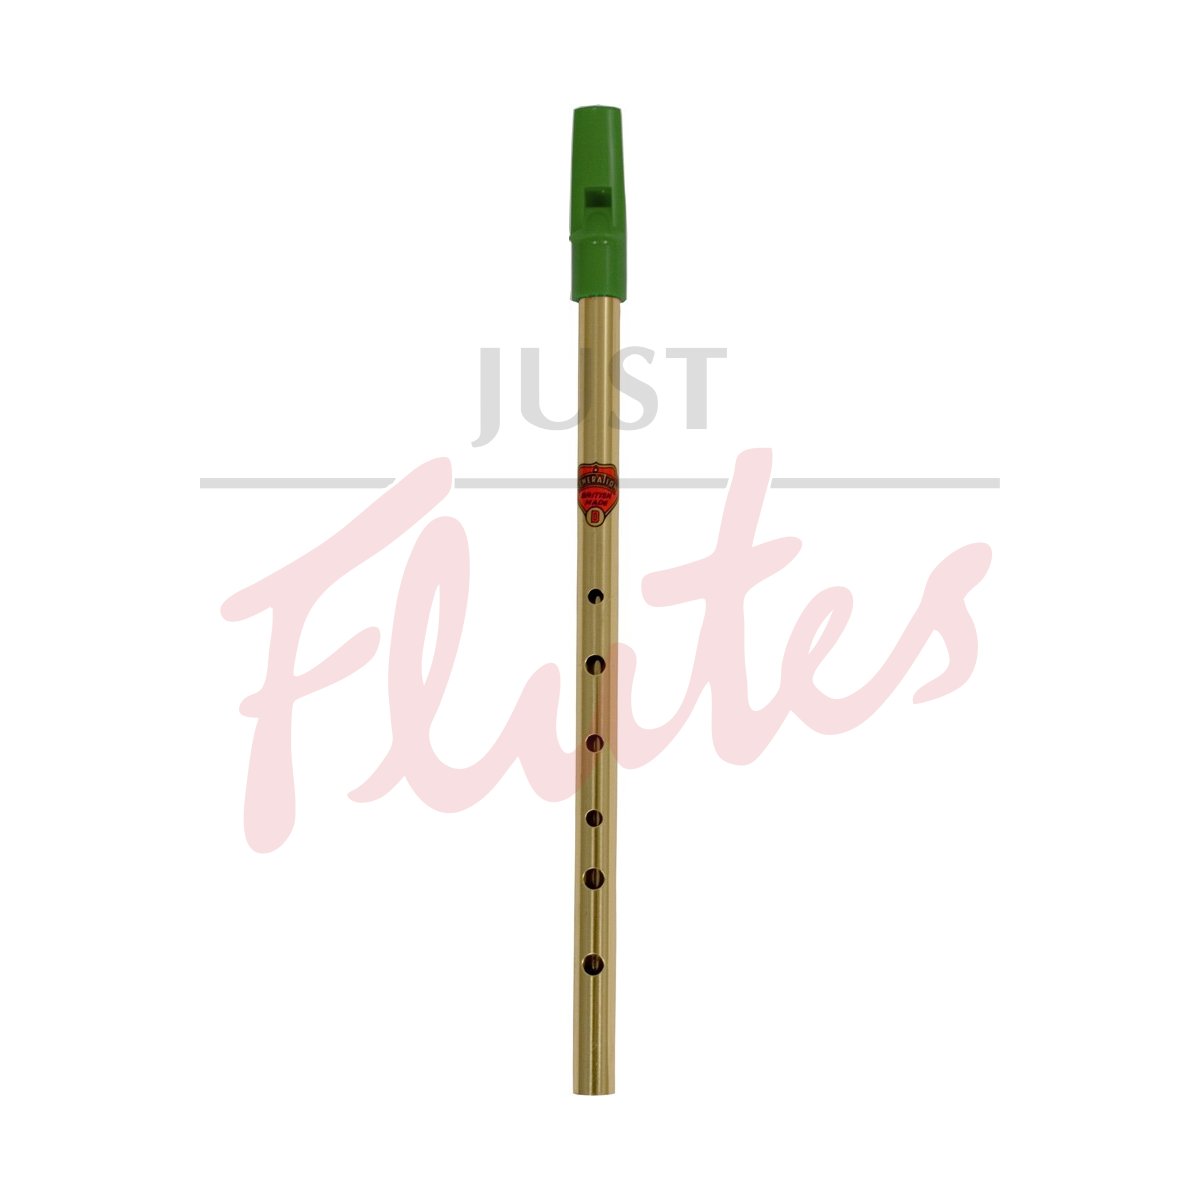 Generation Brass Tin Whistle/Flageolet in D, Green Top